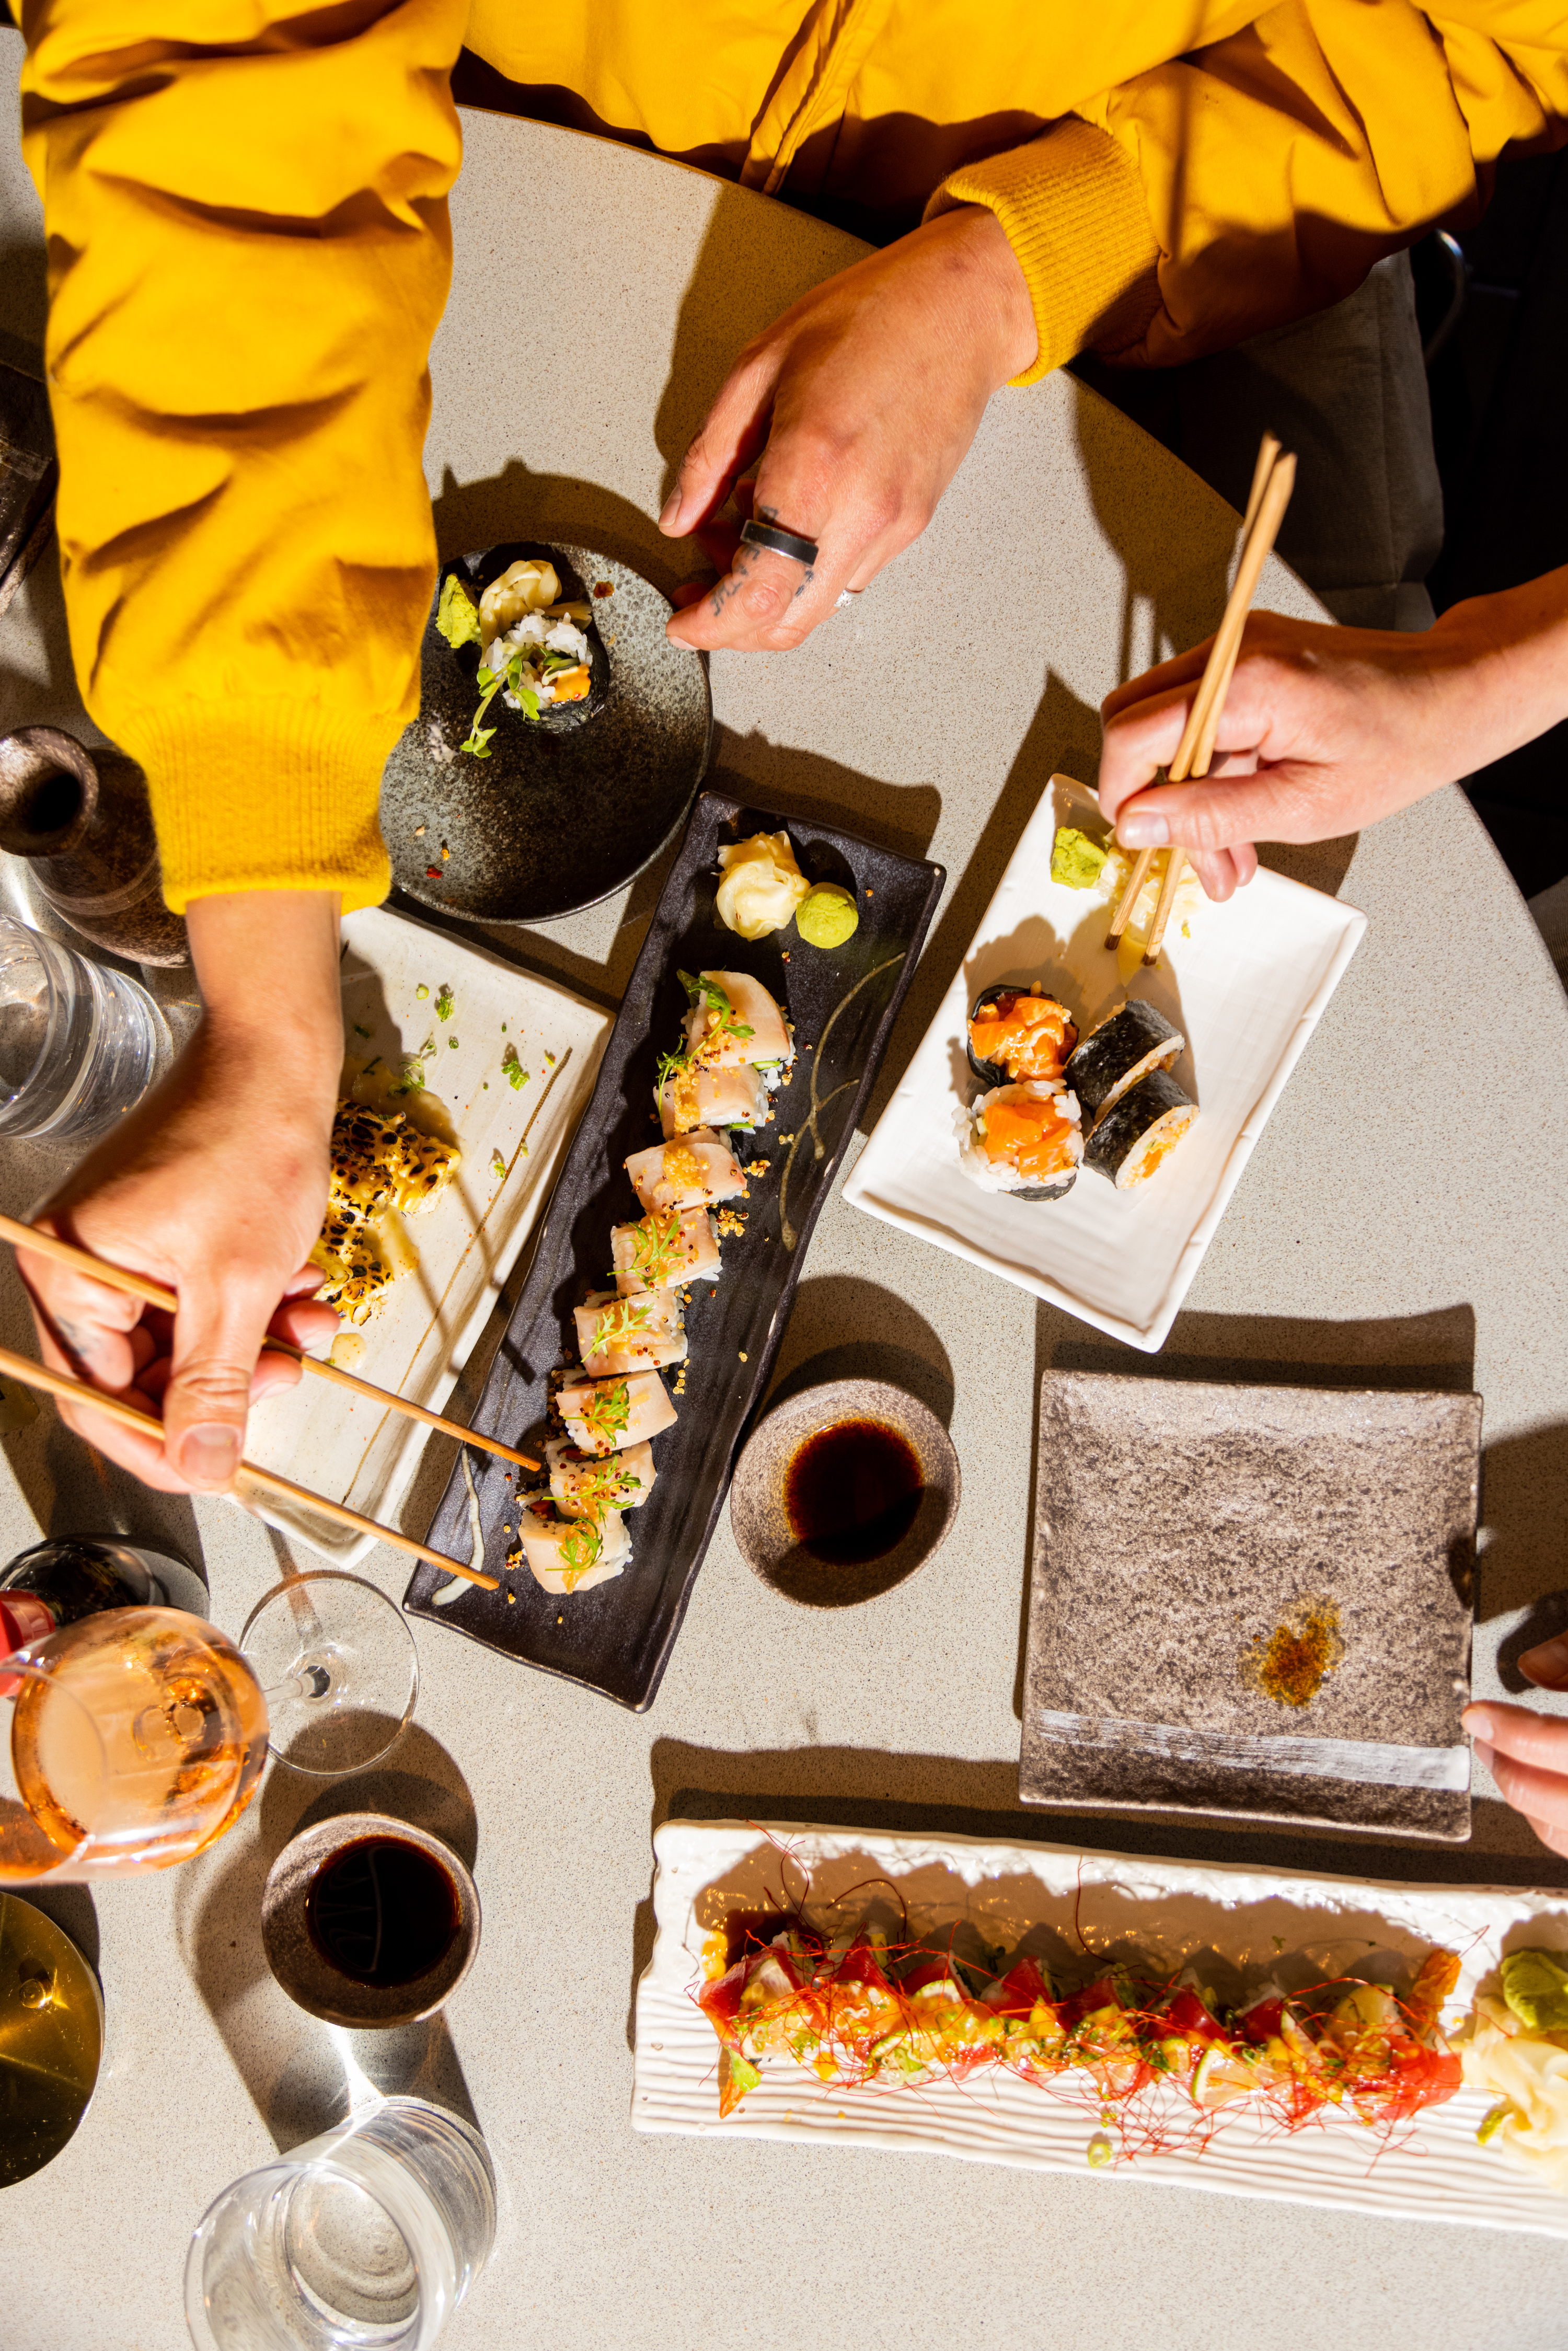 Two people are using chopsticks to eat various sushi dishes arranged on a table, including sushi rolls and nigiri, with dipping sauces and beverages.